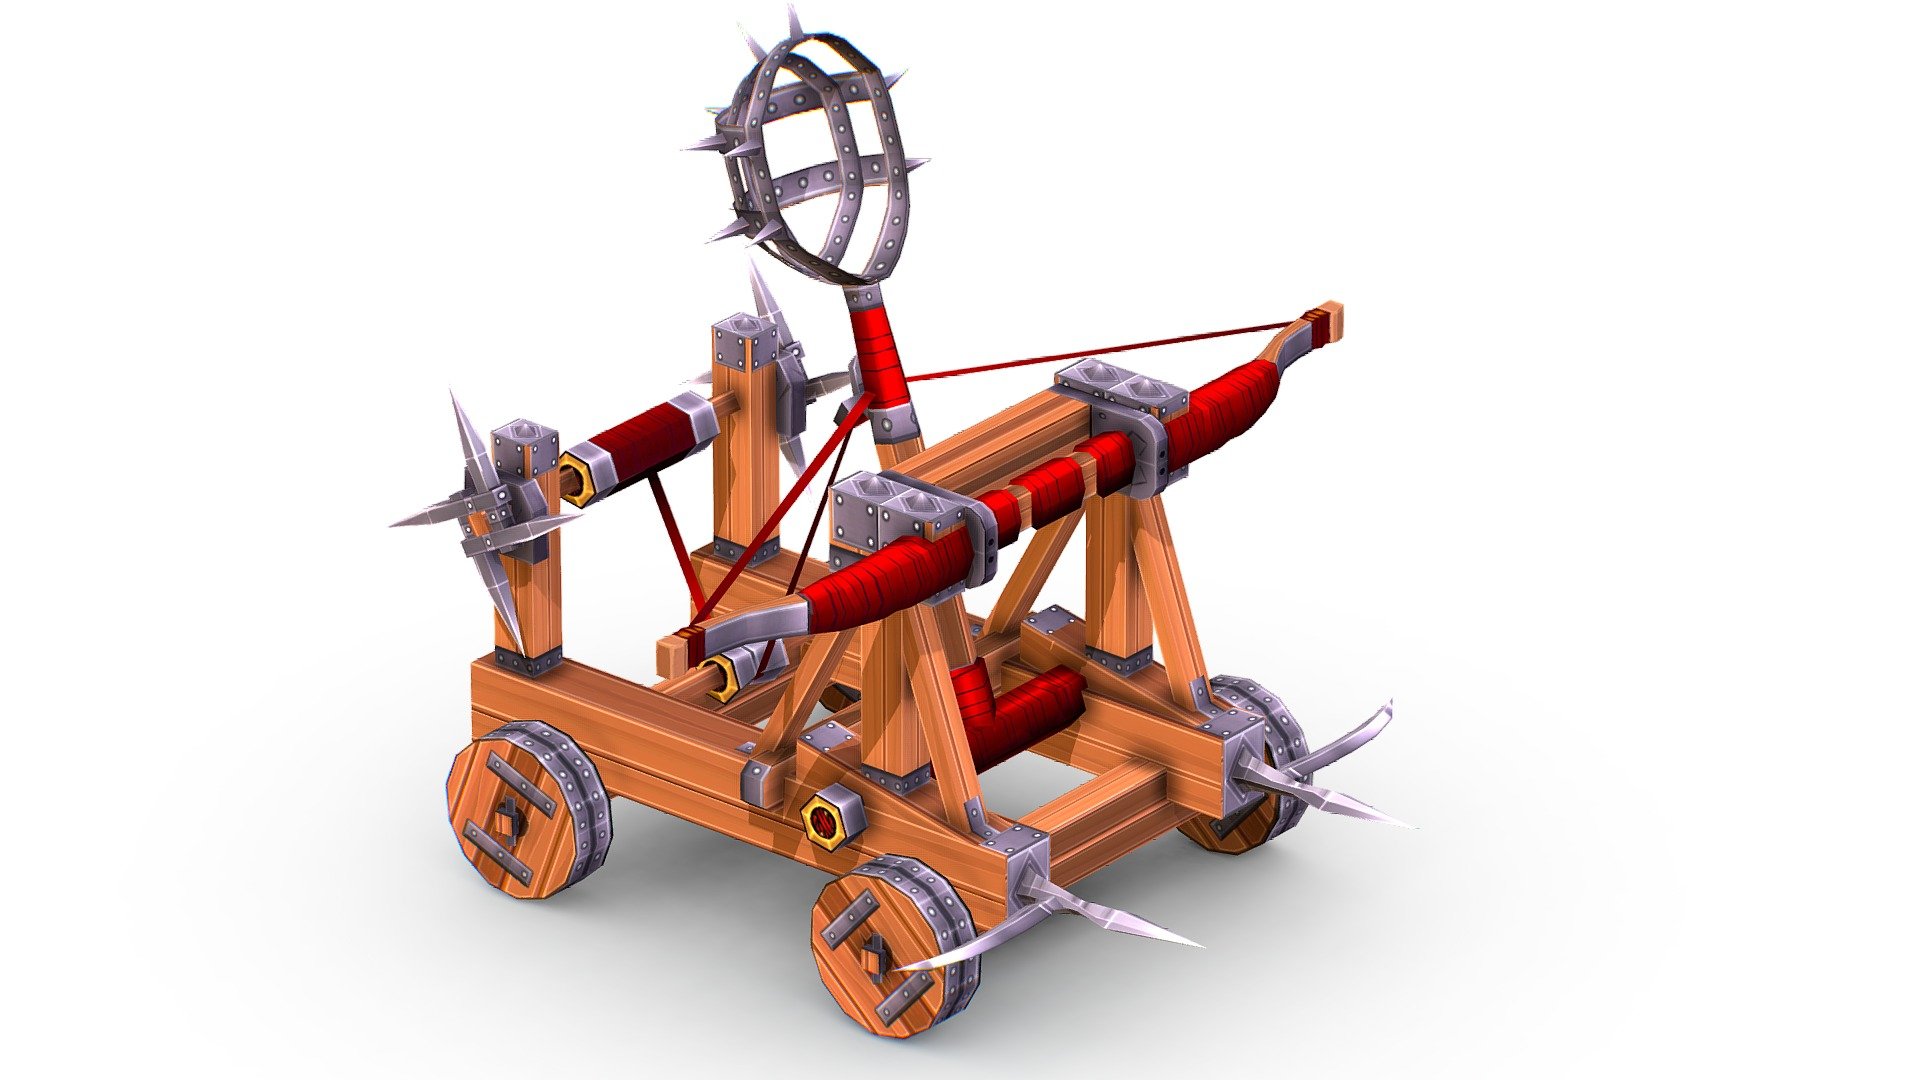 Handpaint Cartoon Medieval Catapult Siege Weapon - 3dsMax and Maya file included - Texture size 2048 color map 3d model